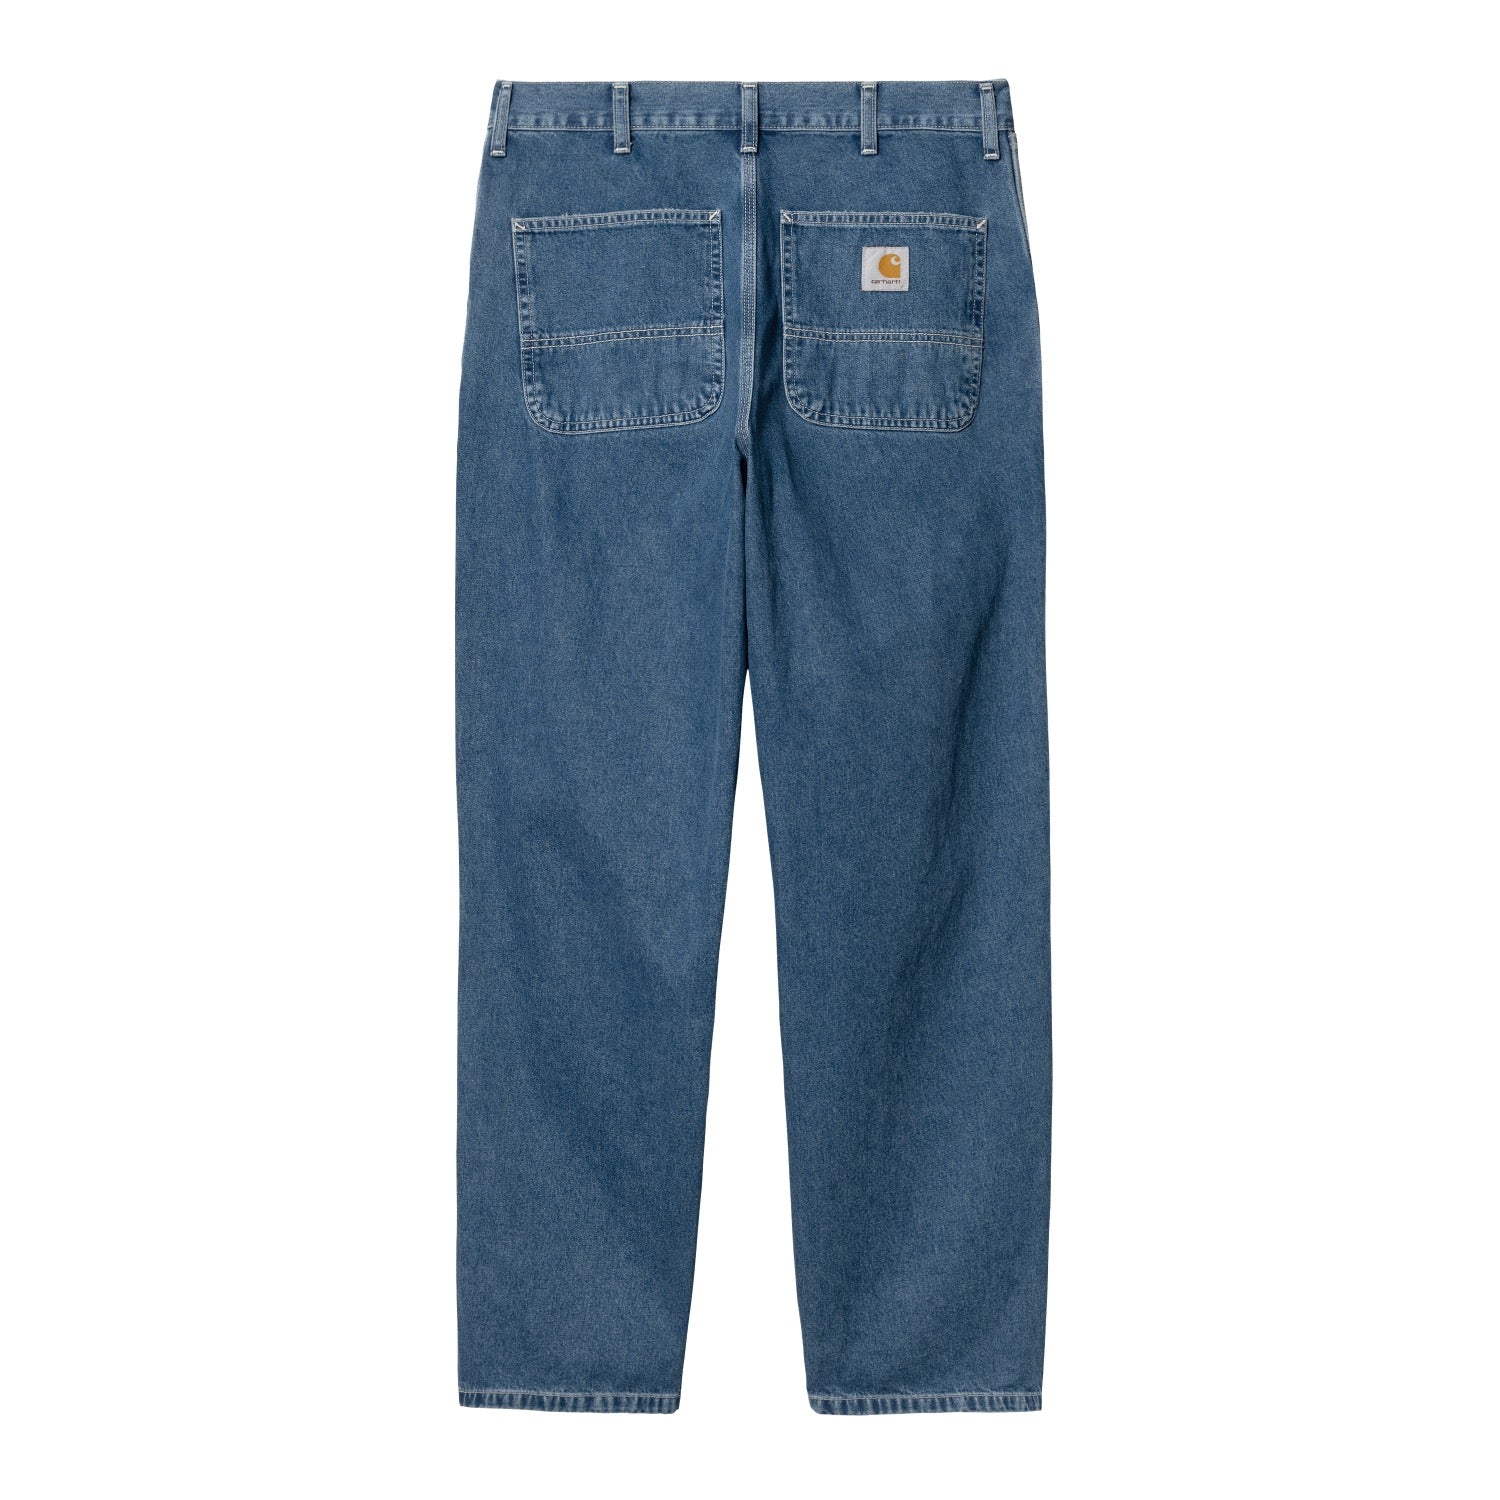 SIMPLE PANT - Blue (stone washed)